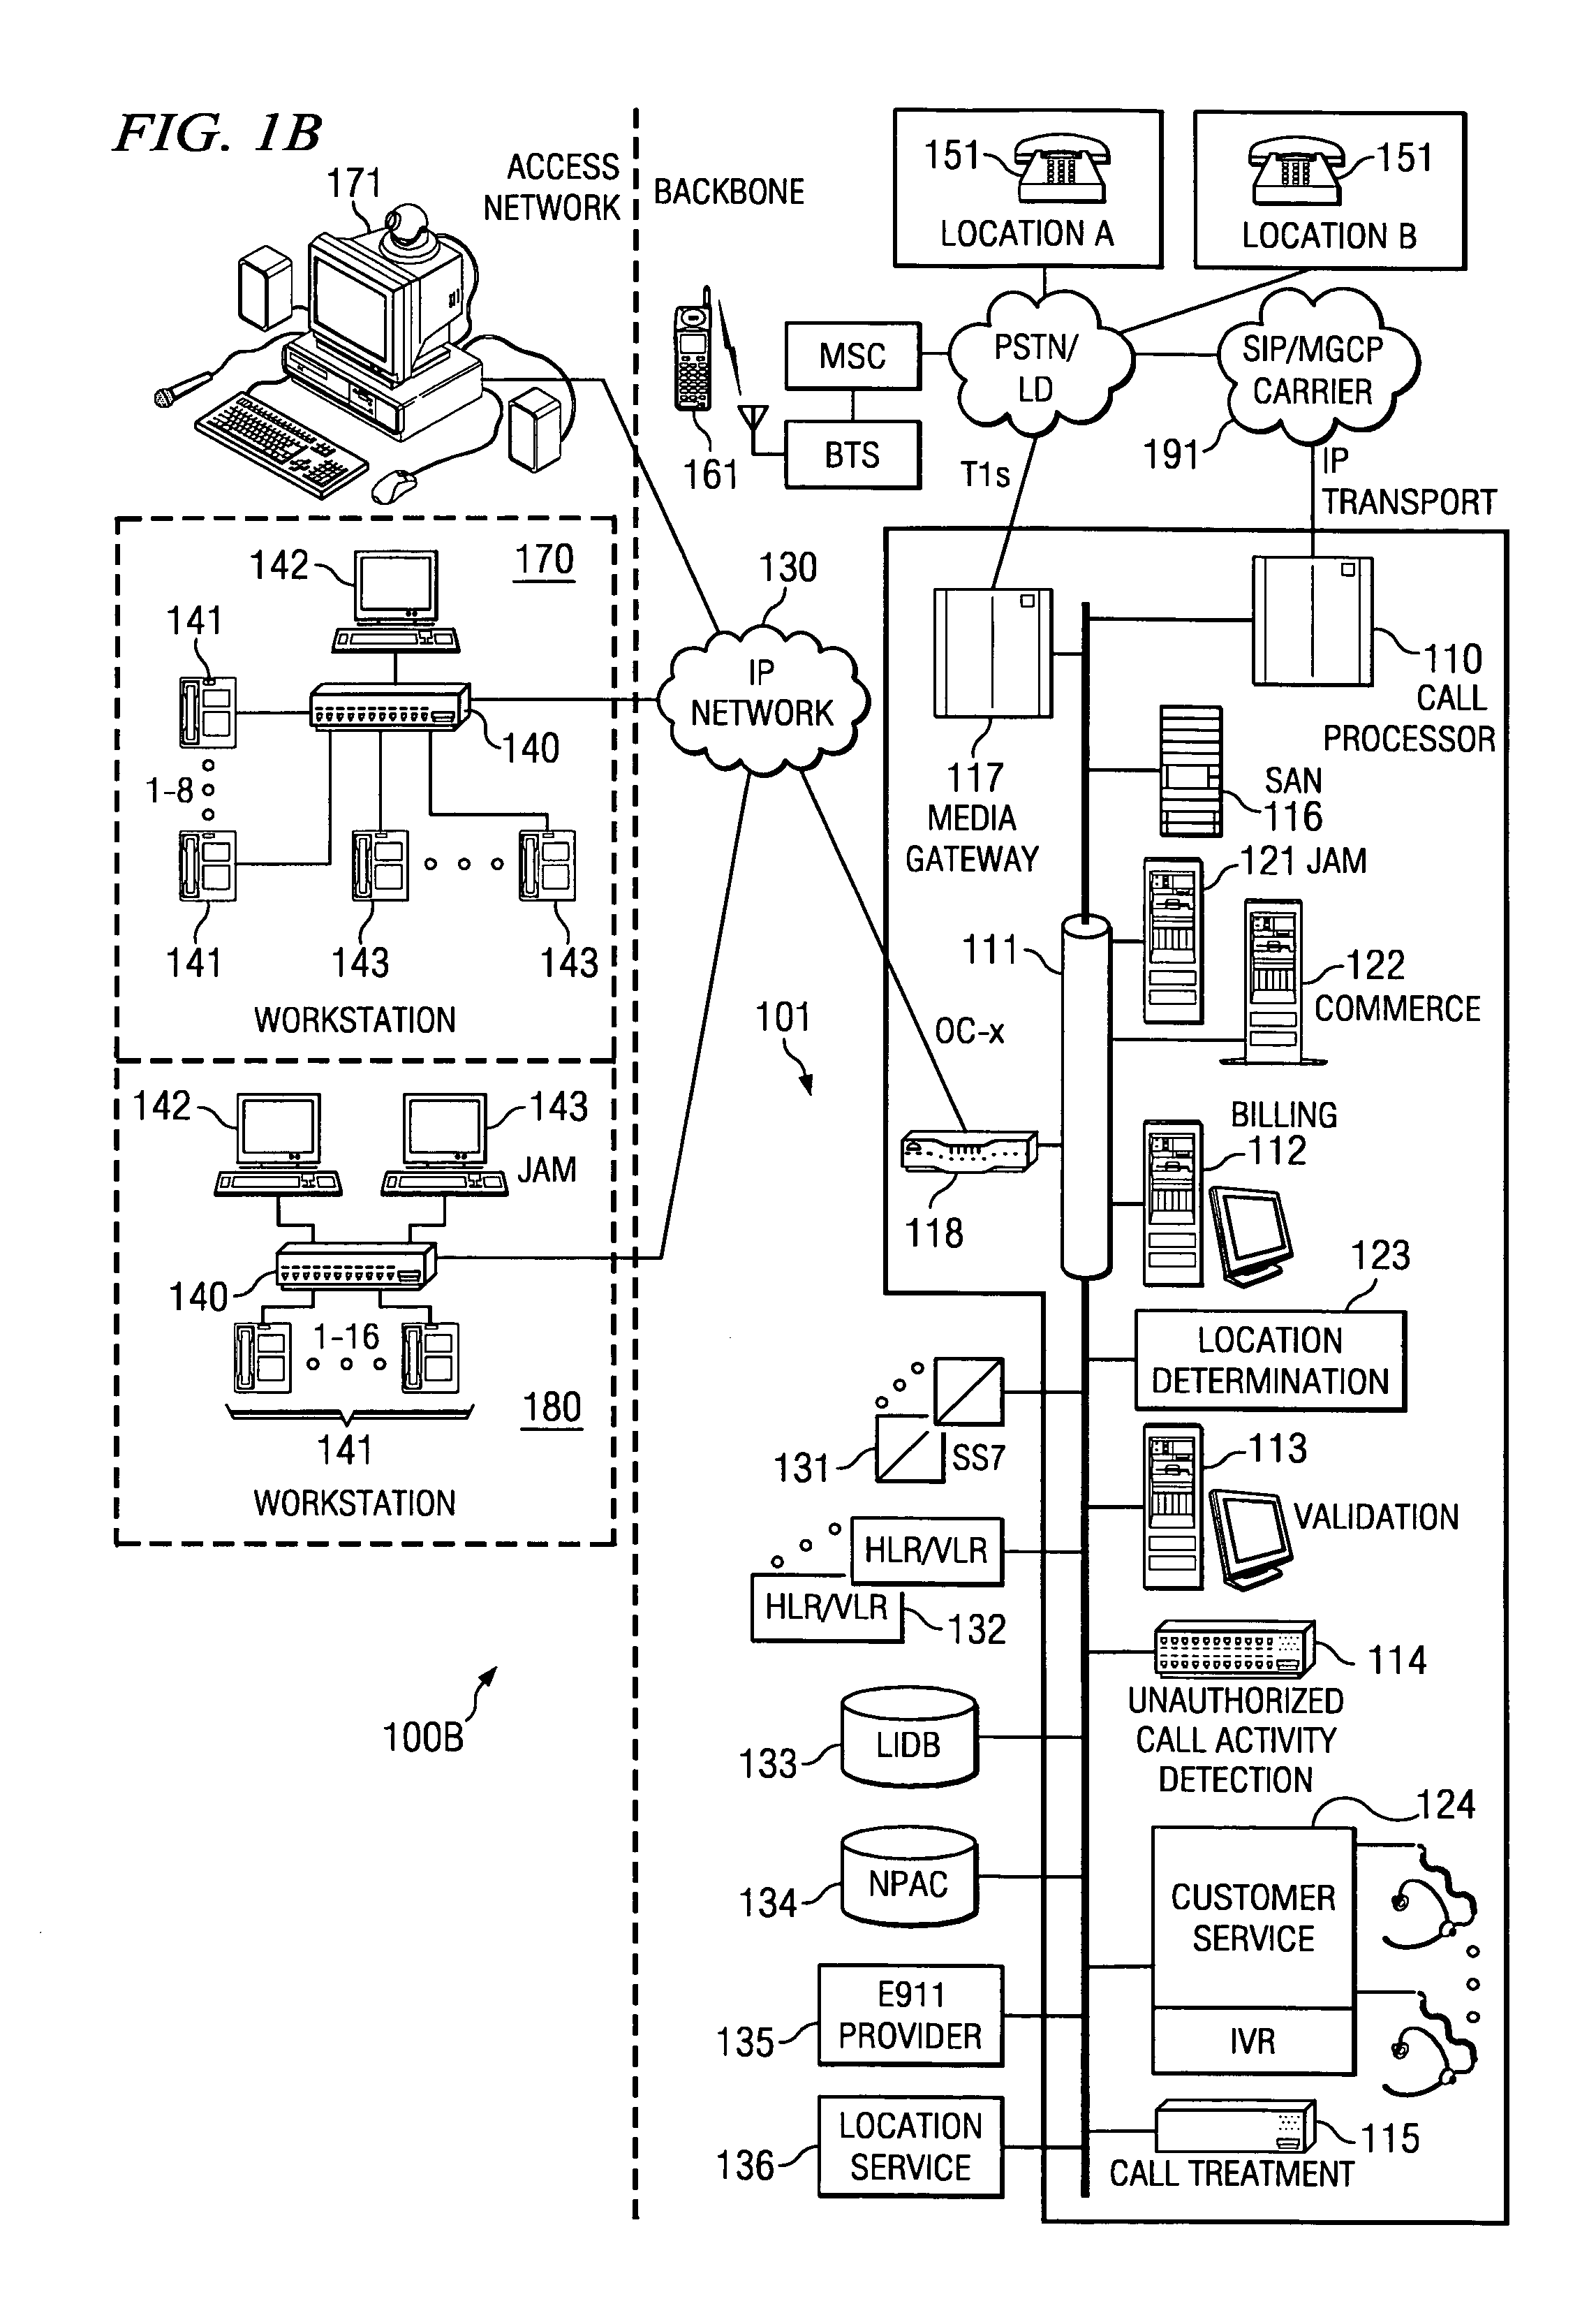 Systems and methods for processing calls directed to telephones having a portable interface